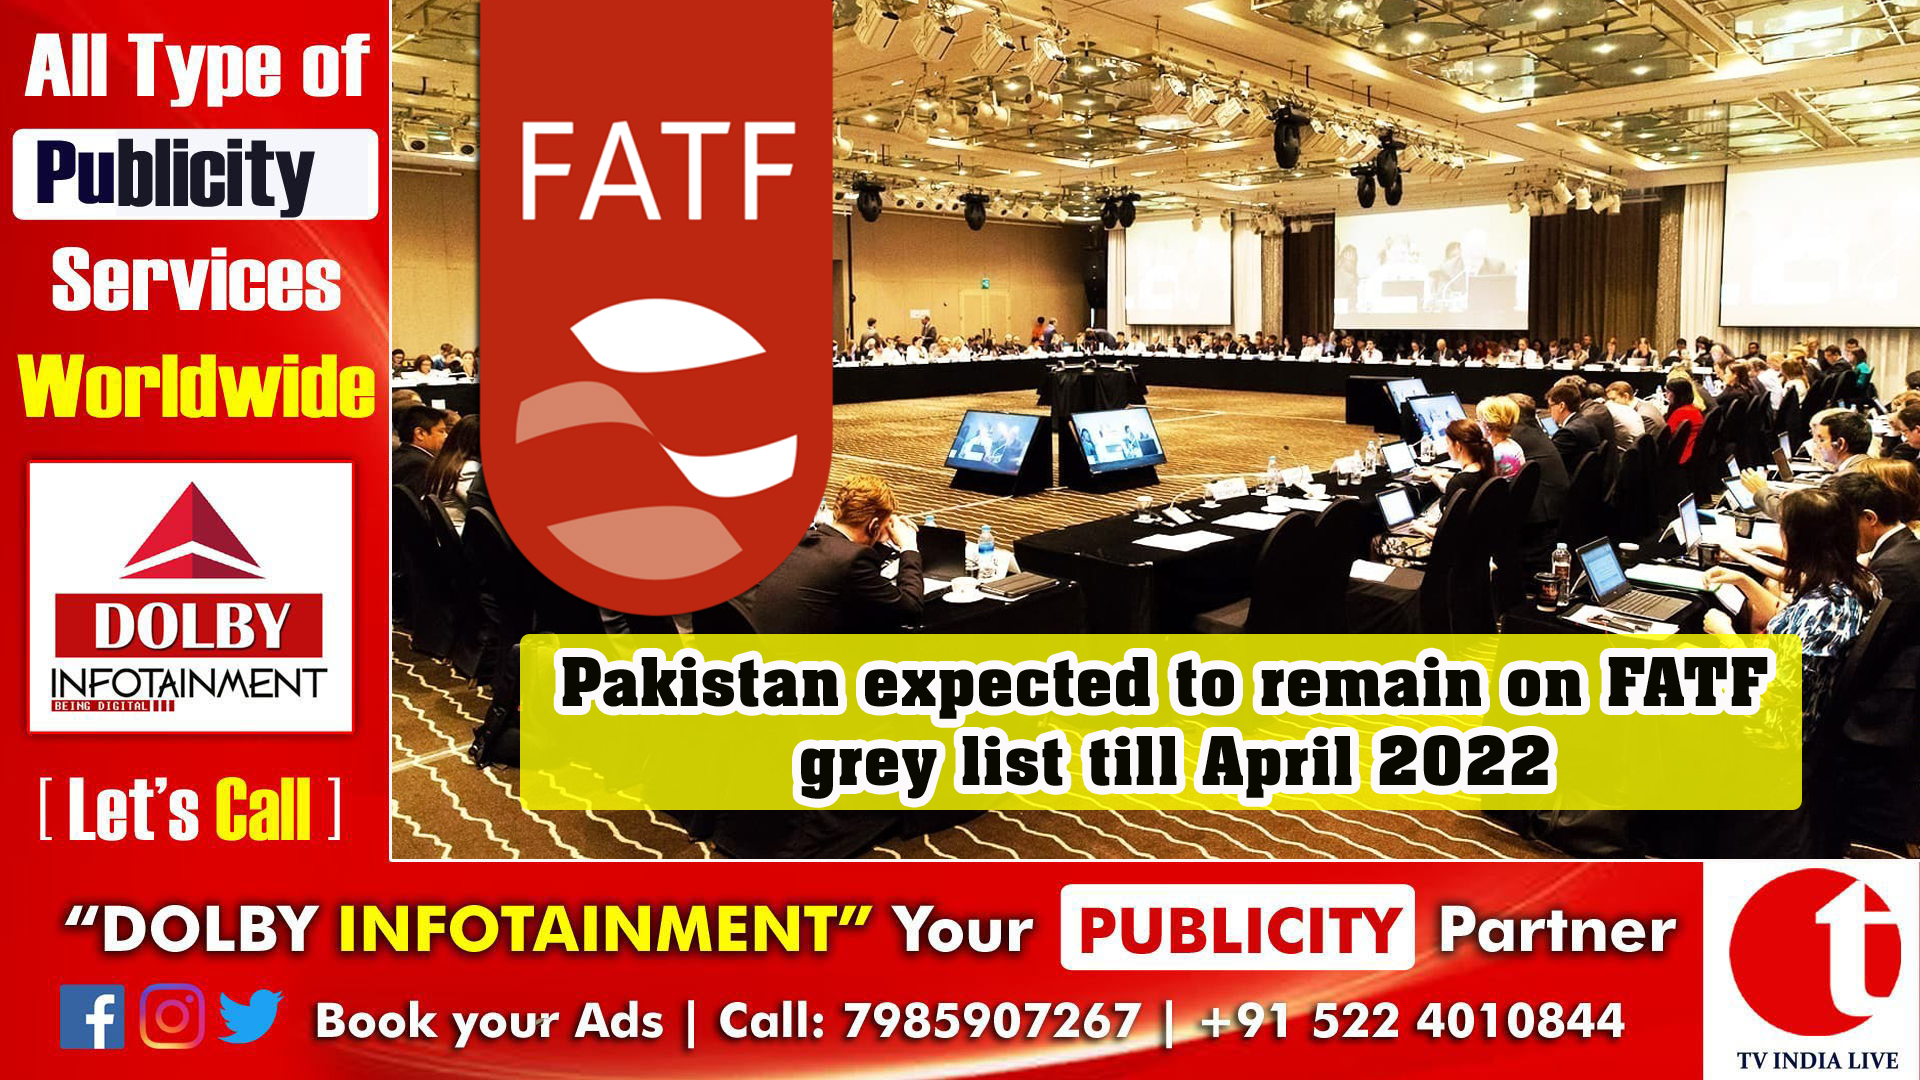 Pakistan expected to remain on FATF grey list till April 2022